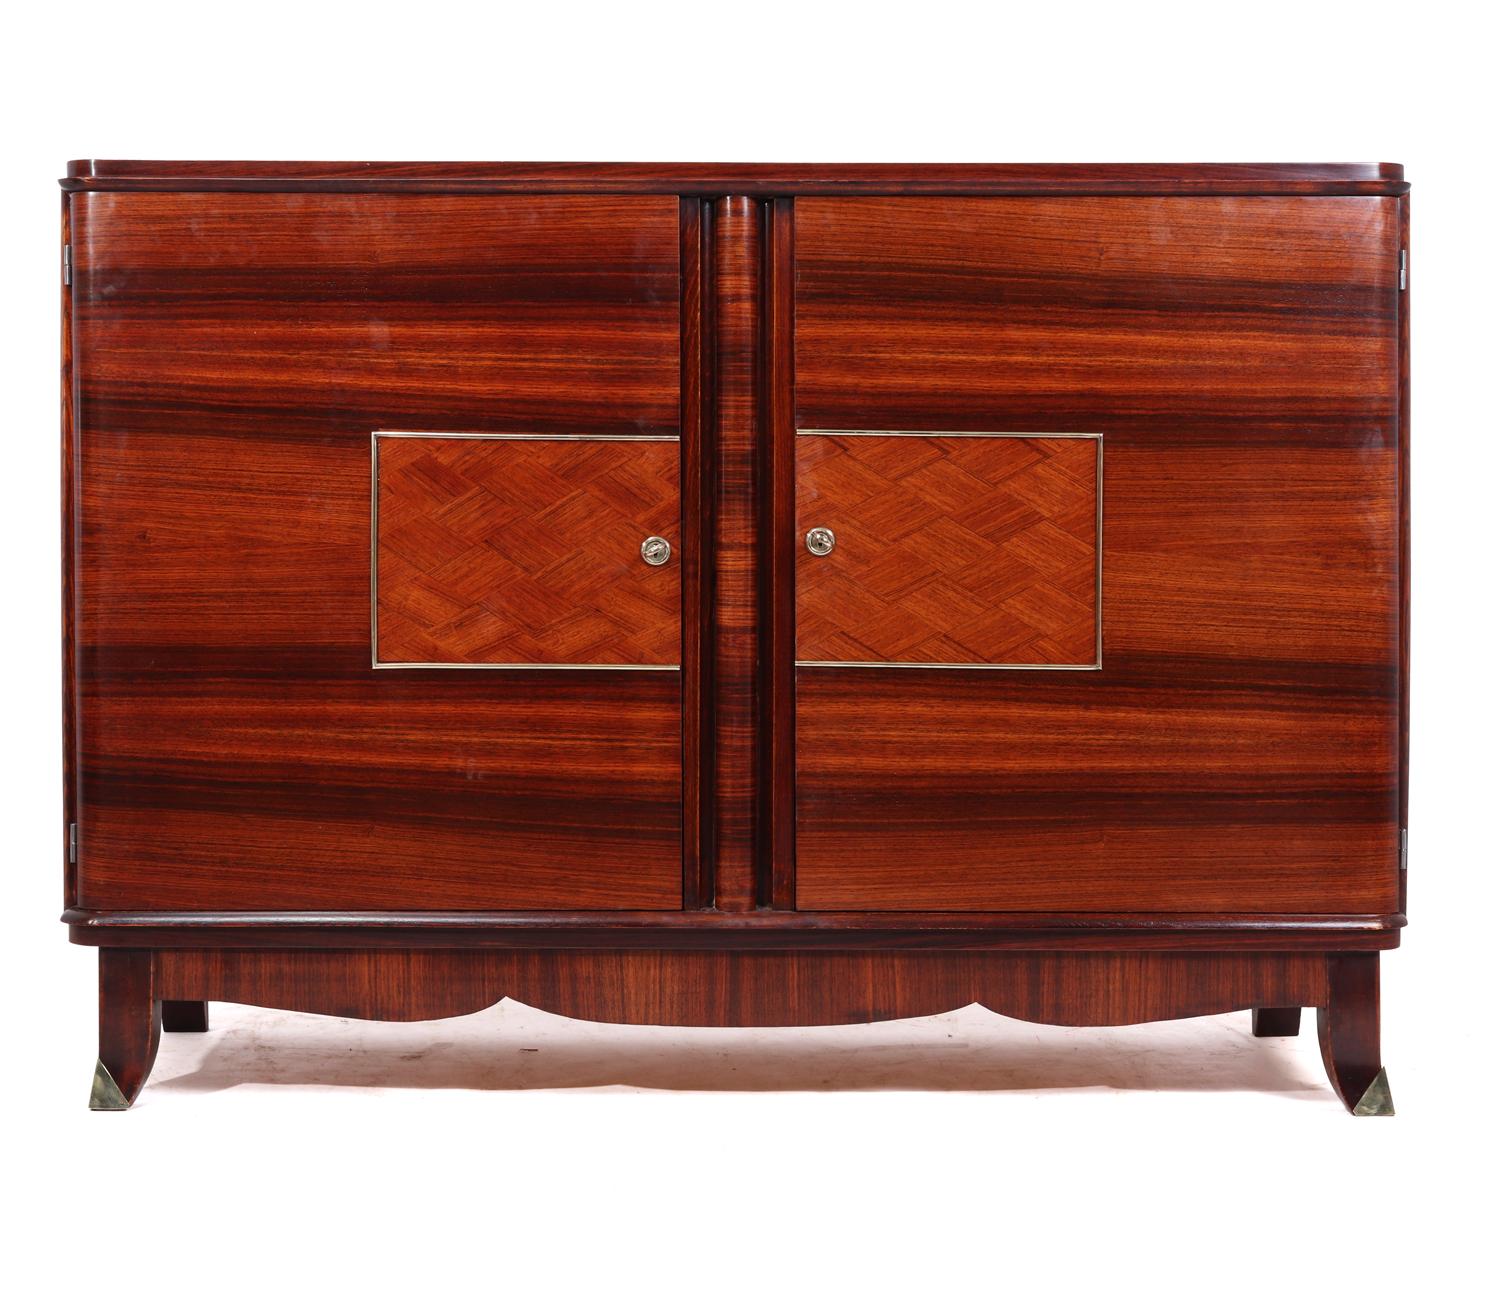 Art Deco sideboard, circa 1930
A French produced art deco sideboard in rosewood with parquetry panel brass hard-wear both doors lockable with keys supplied

Age: 1930

Style: Art Deco

Material: Rosewood

Origin : France

Condition: Very